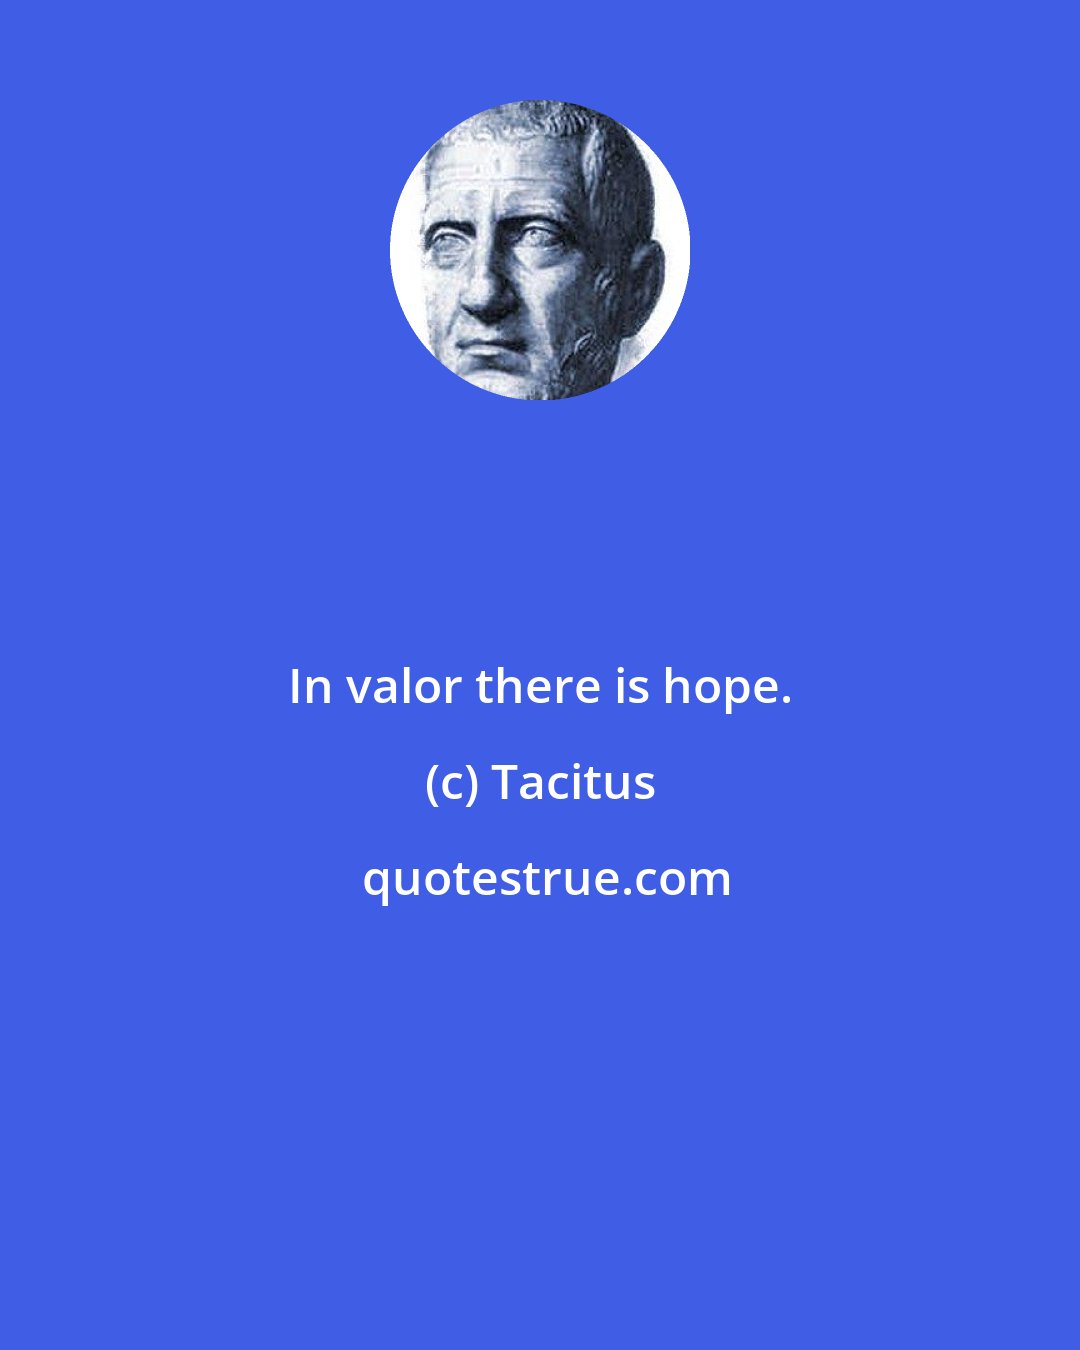 Tacitus: In valor there is hope.